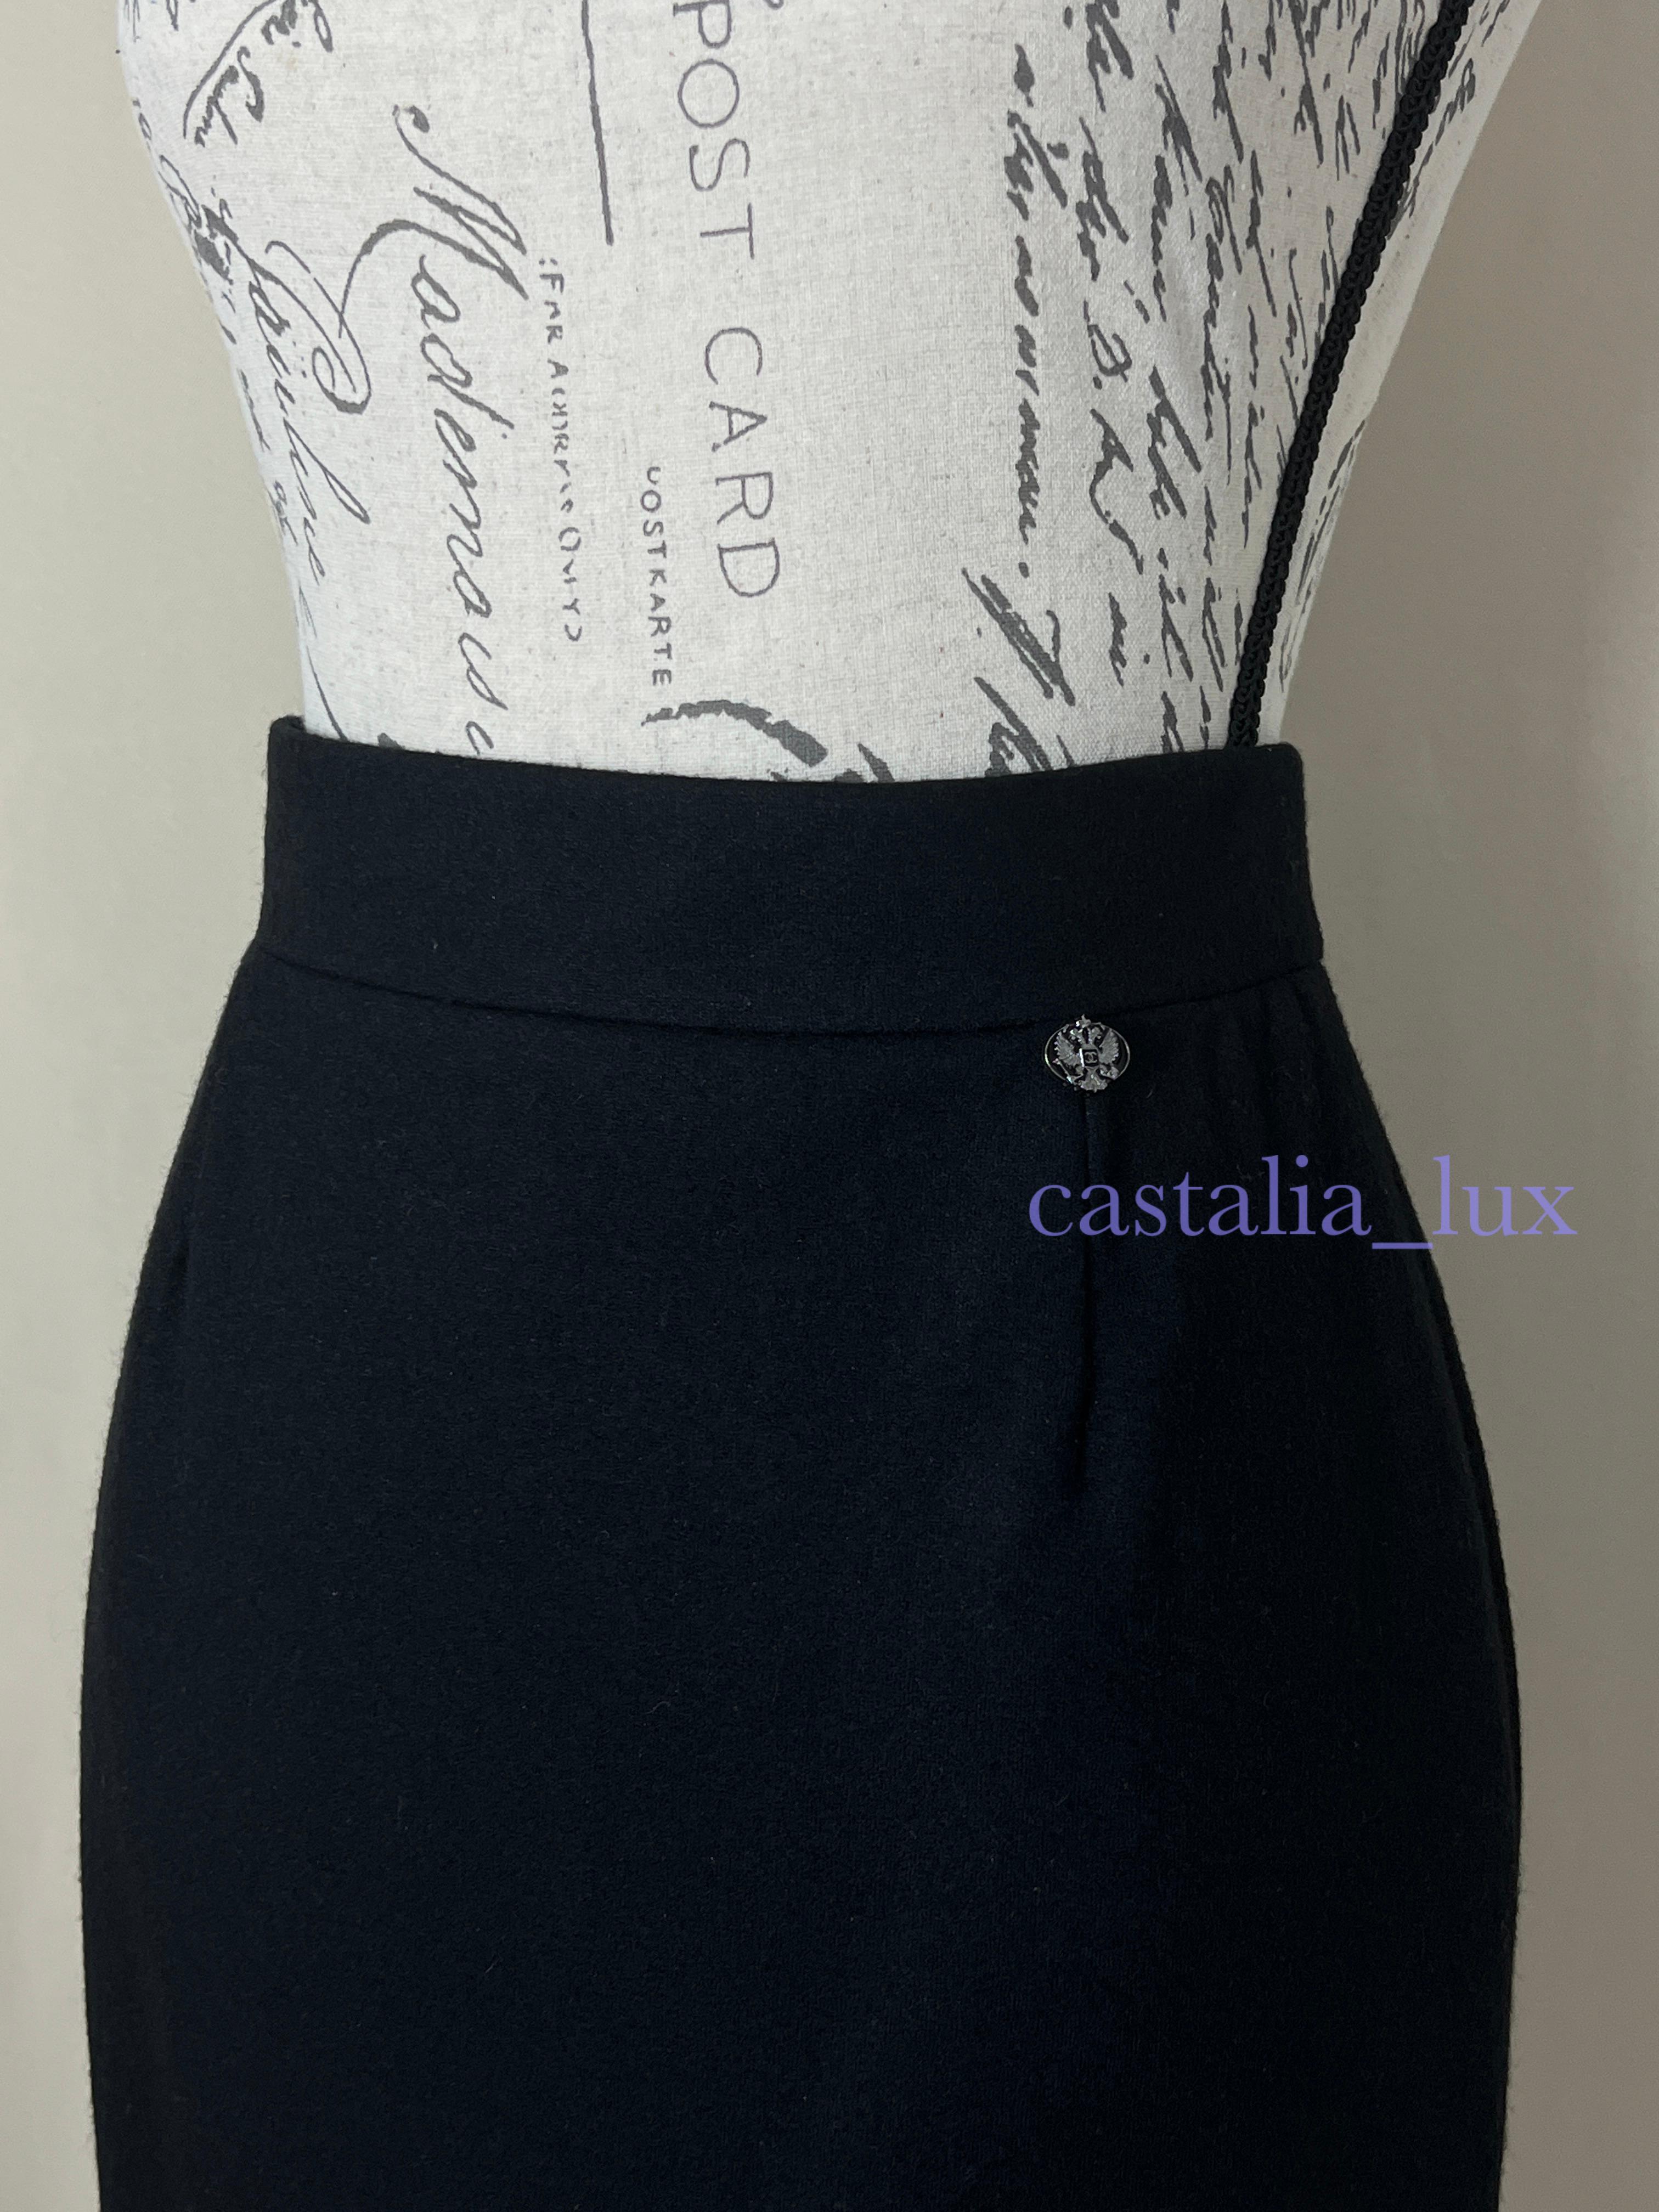 Chanel New Eagle Charm Black Pencil Skirt For Sale 1